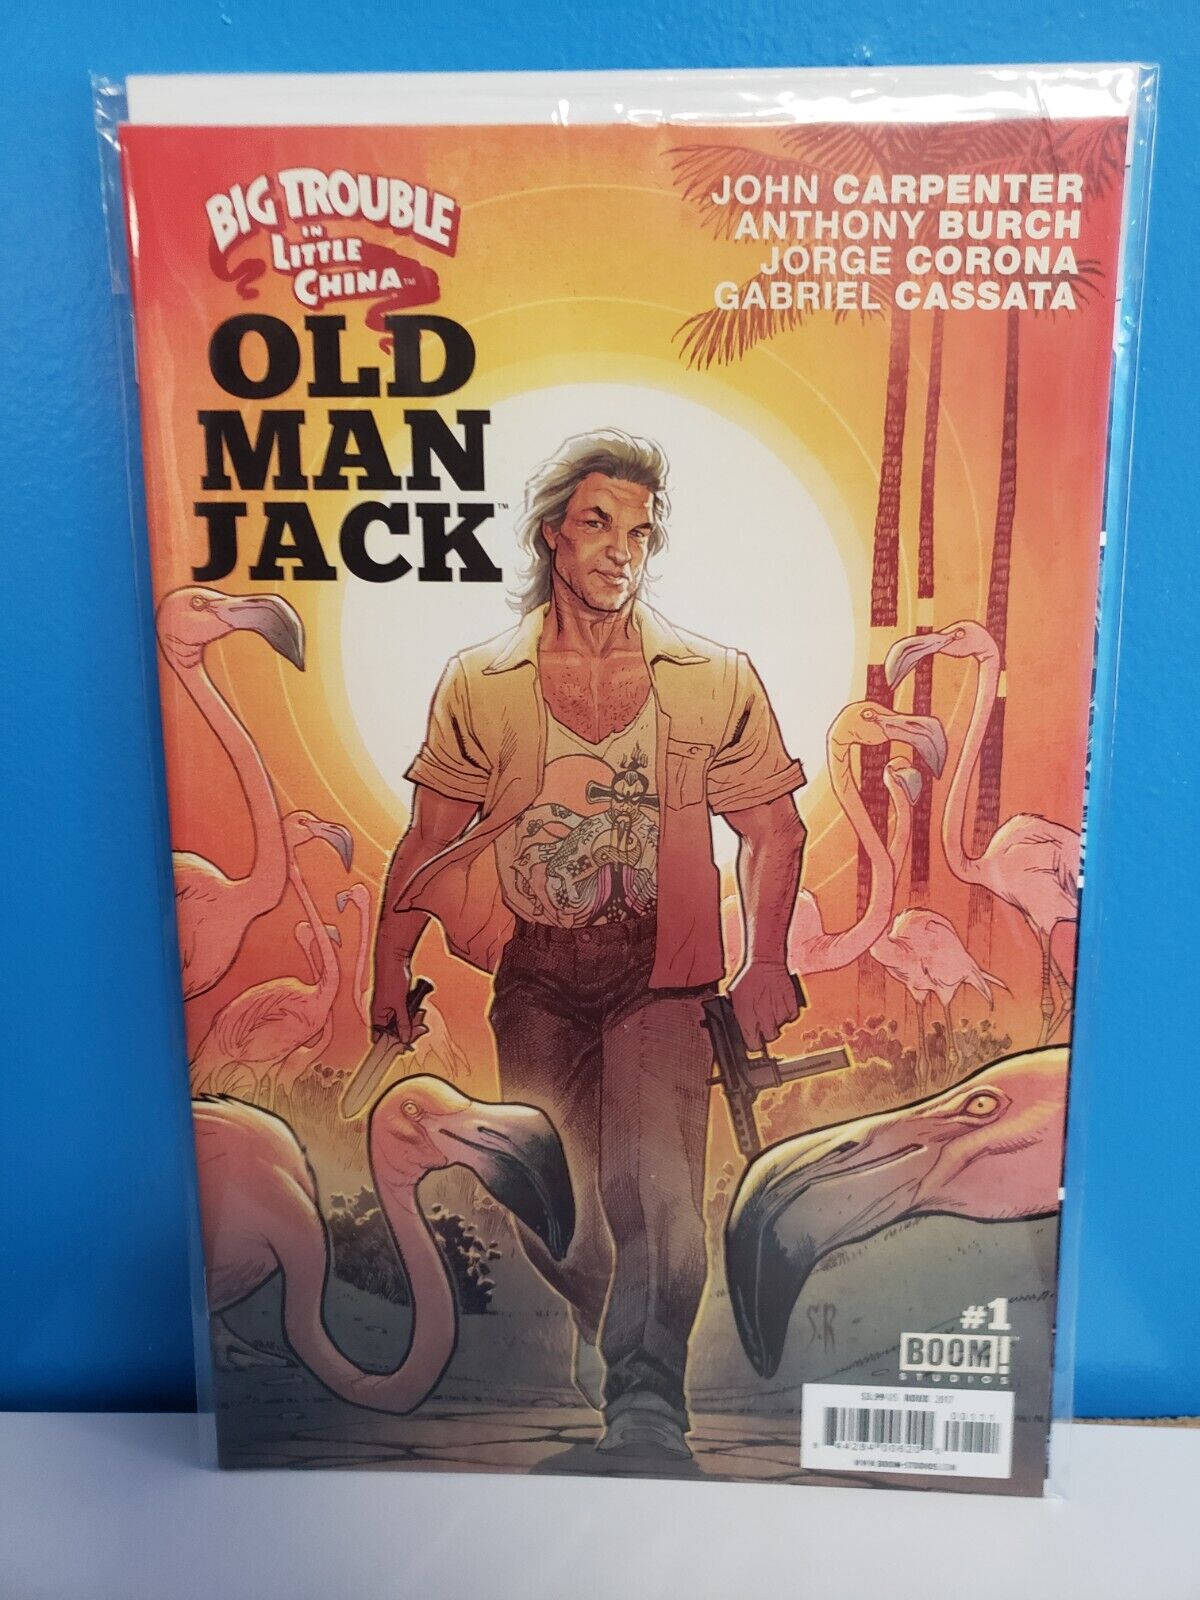 Big Trouble in Little China Old Man Jack #1 Cover A VF/NM